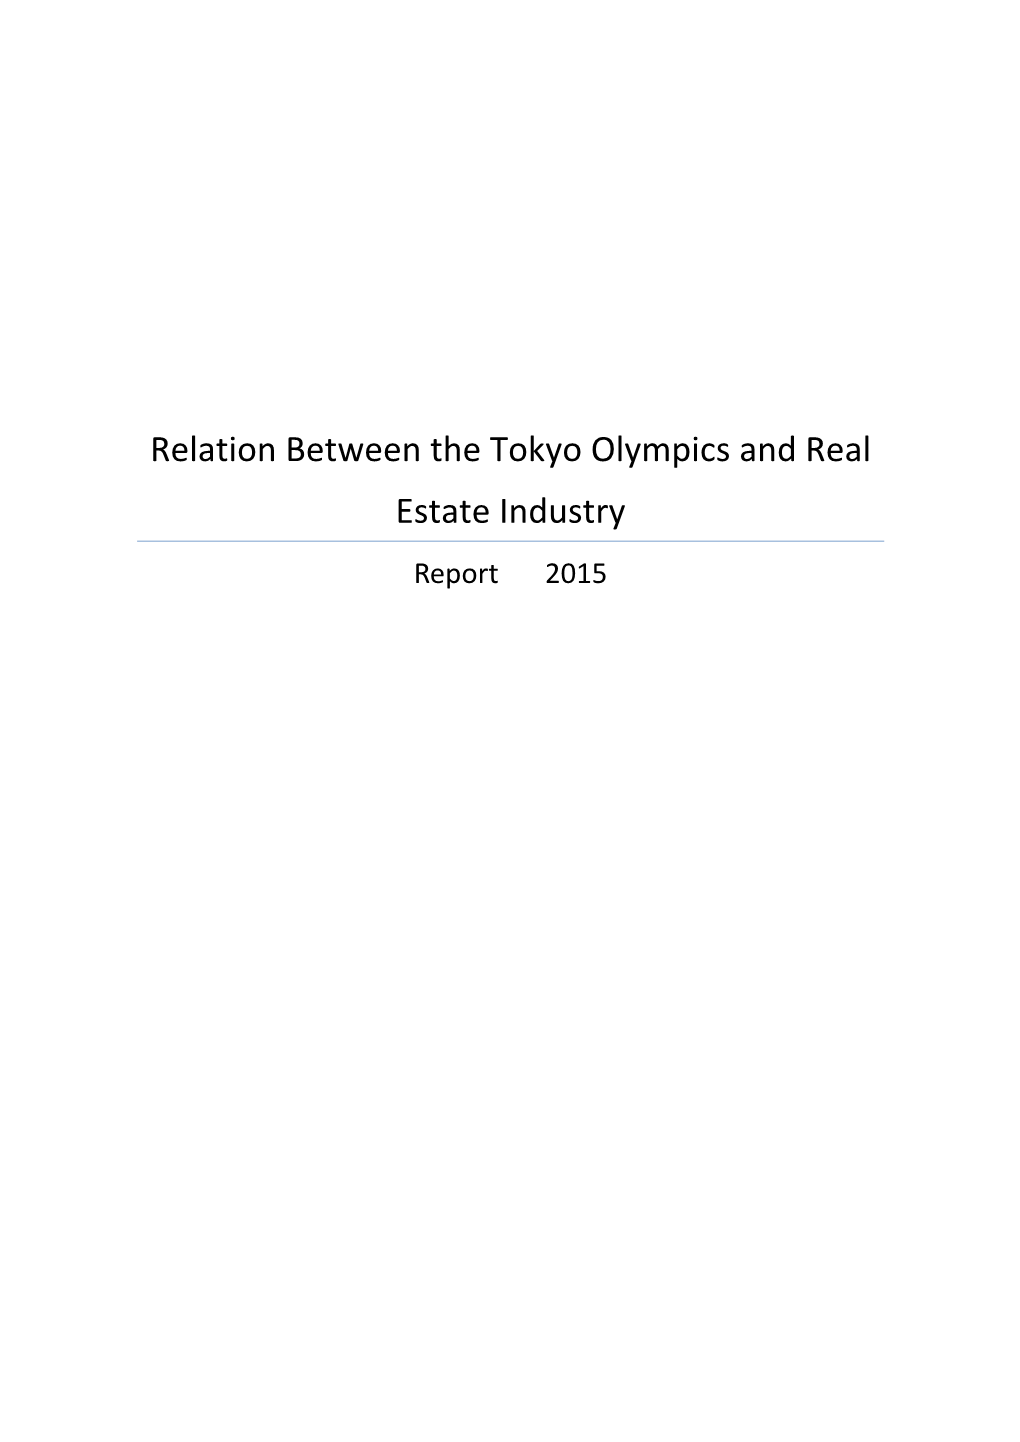 Relation Between the Tokyo Olympics and Real Estate Industry